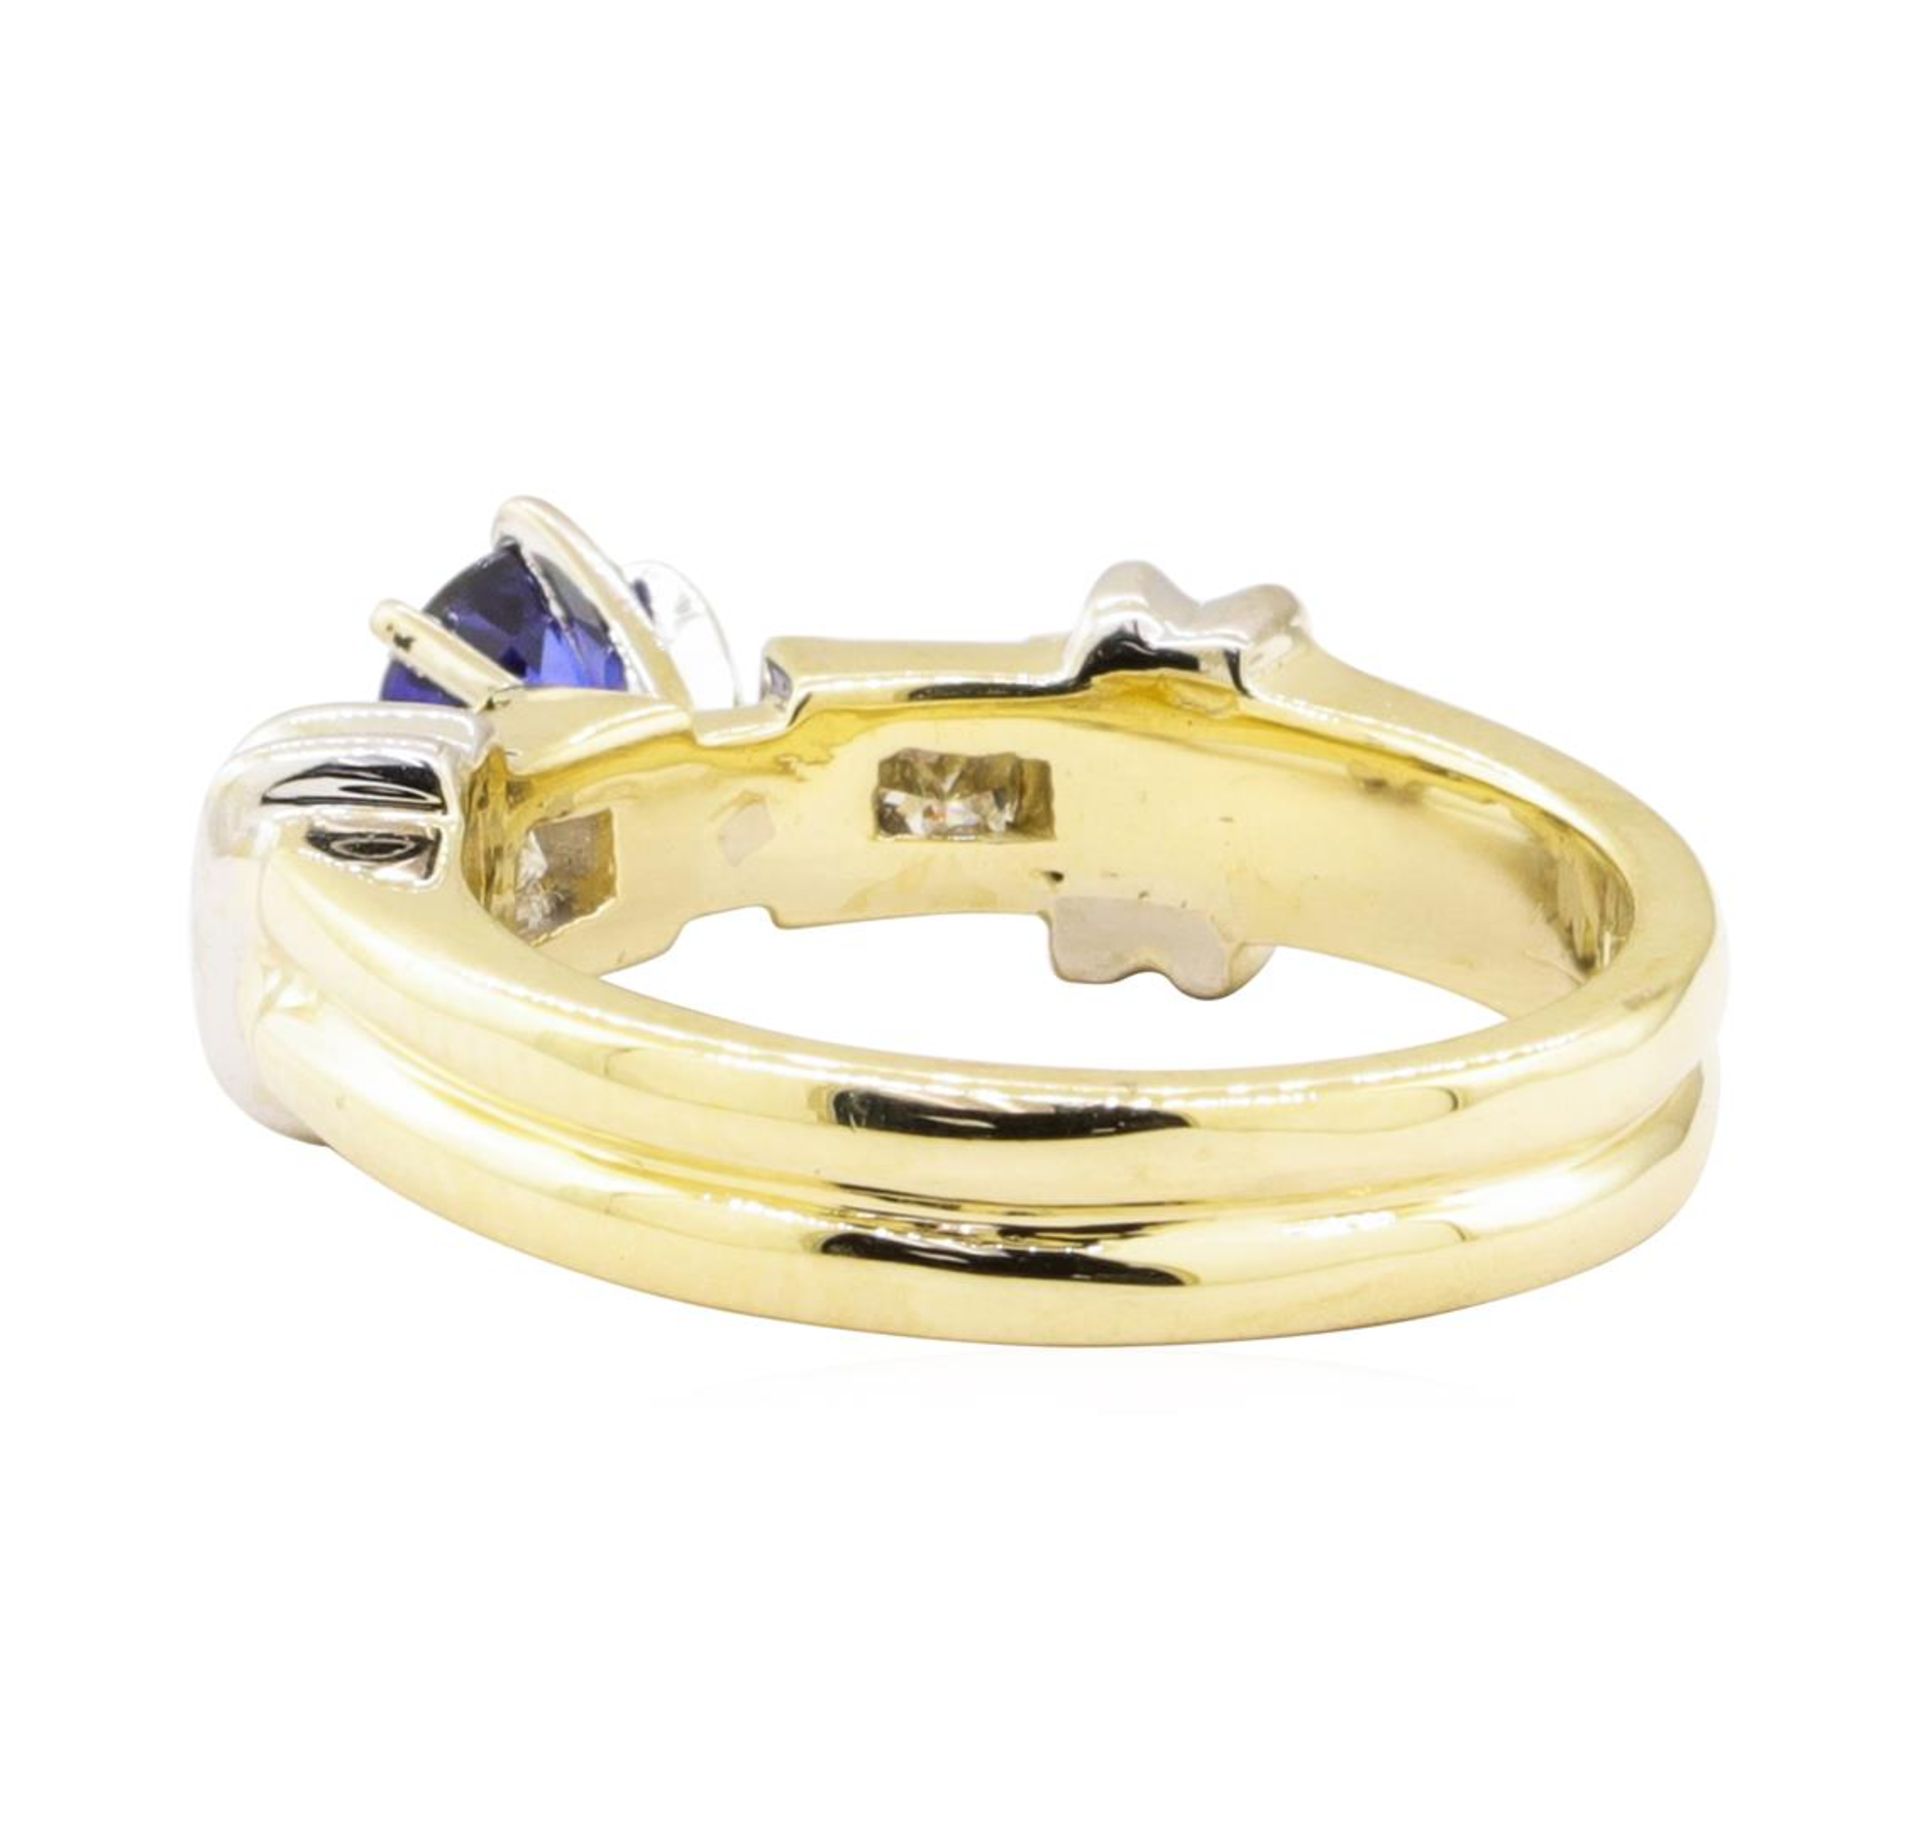 1.16 ctw Blue Sapphire and Diamond Ring - 14KT Yellow and White Gold - Image 3 of 4